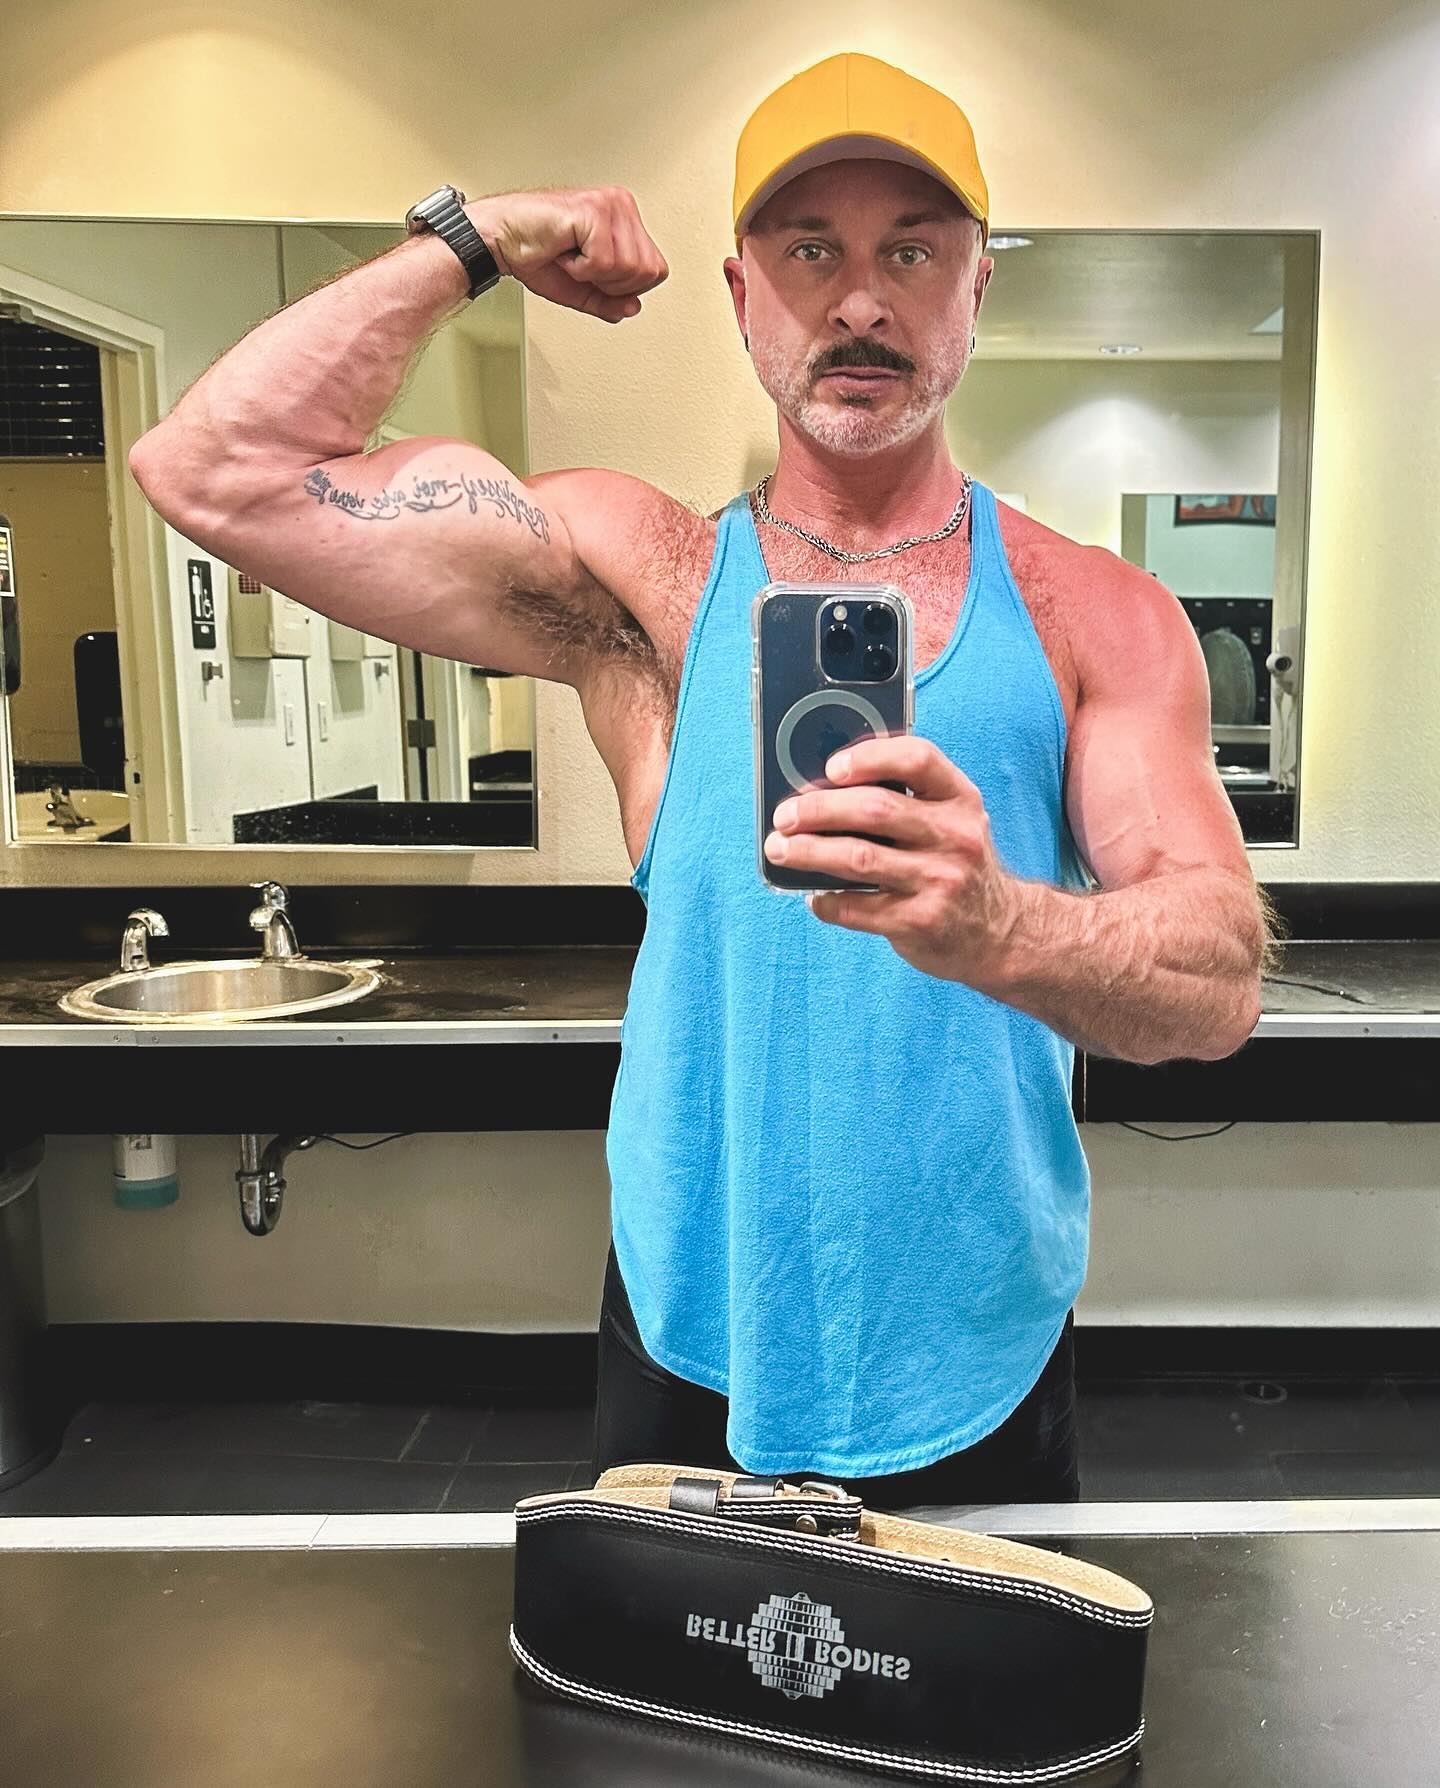 Arms Day Done! #armsday #bicep #gaymuscle #gaymuscledaddy #muscledaddy #fit #fitover50 #gayfit